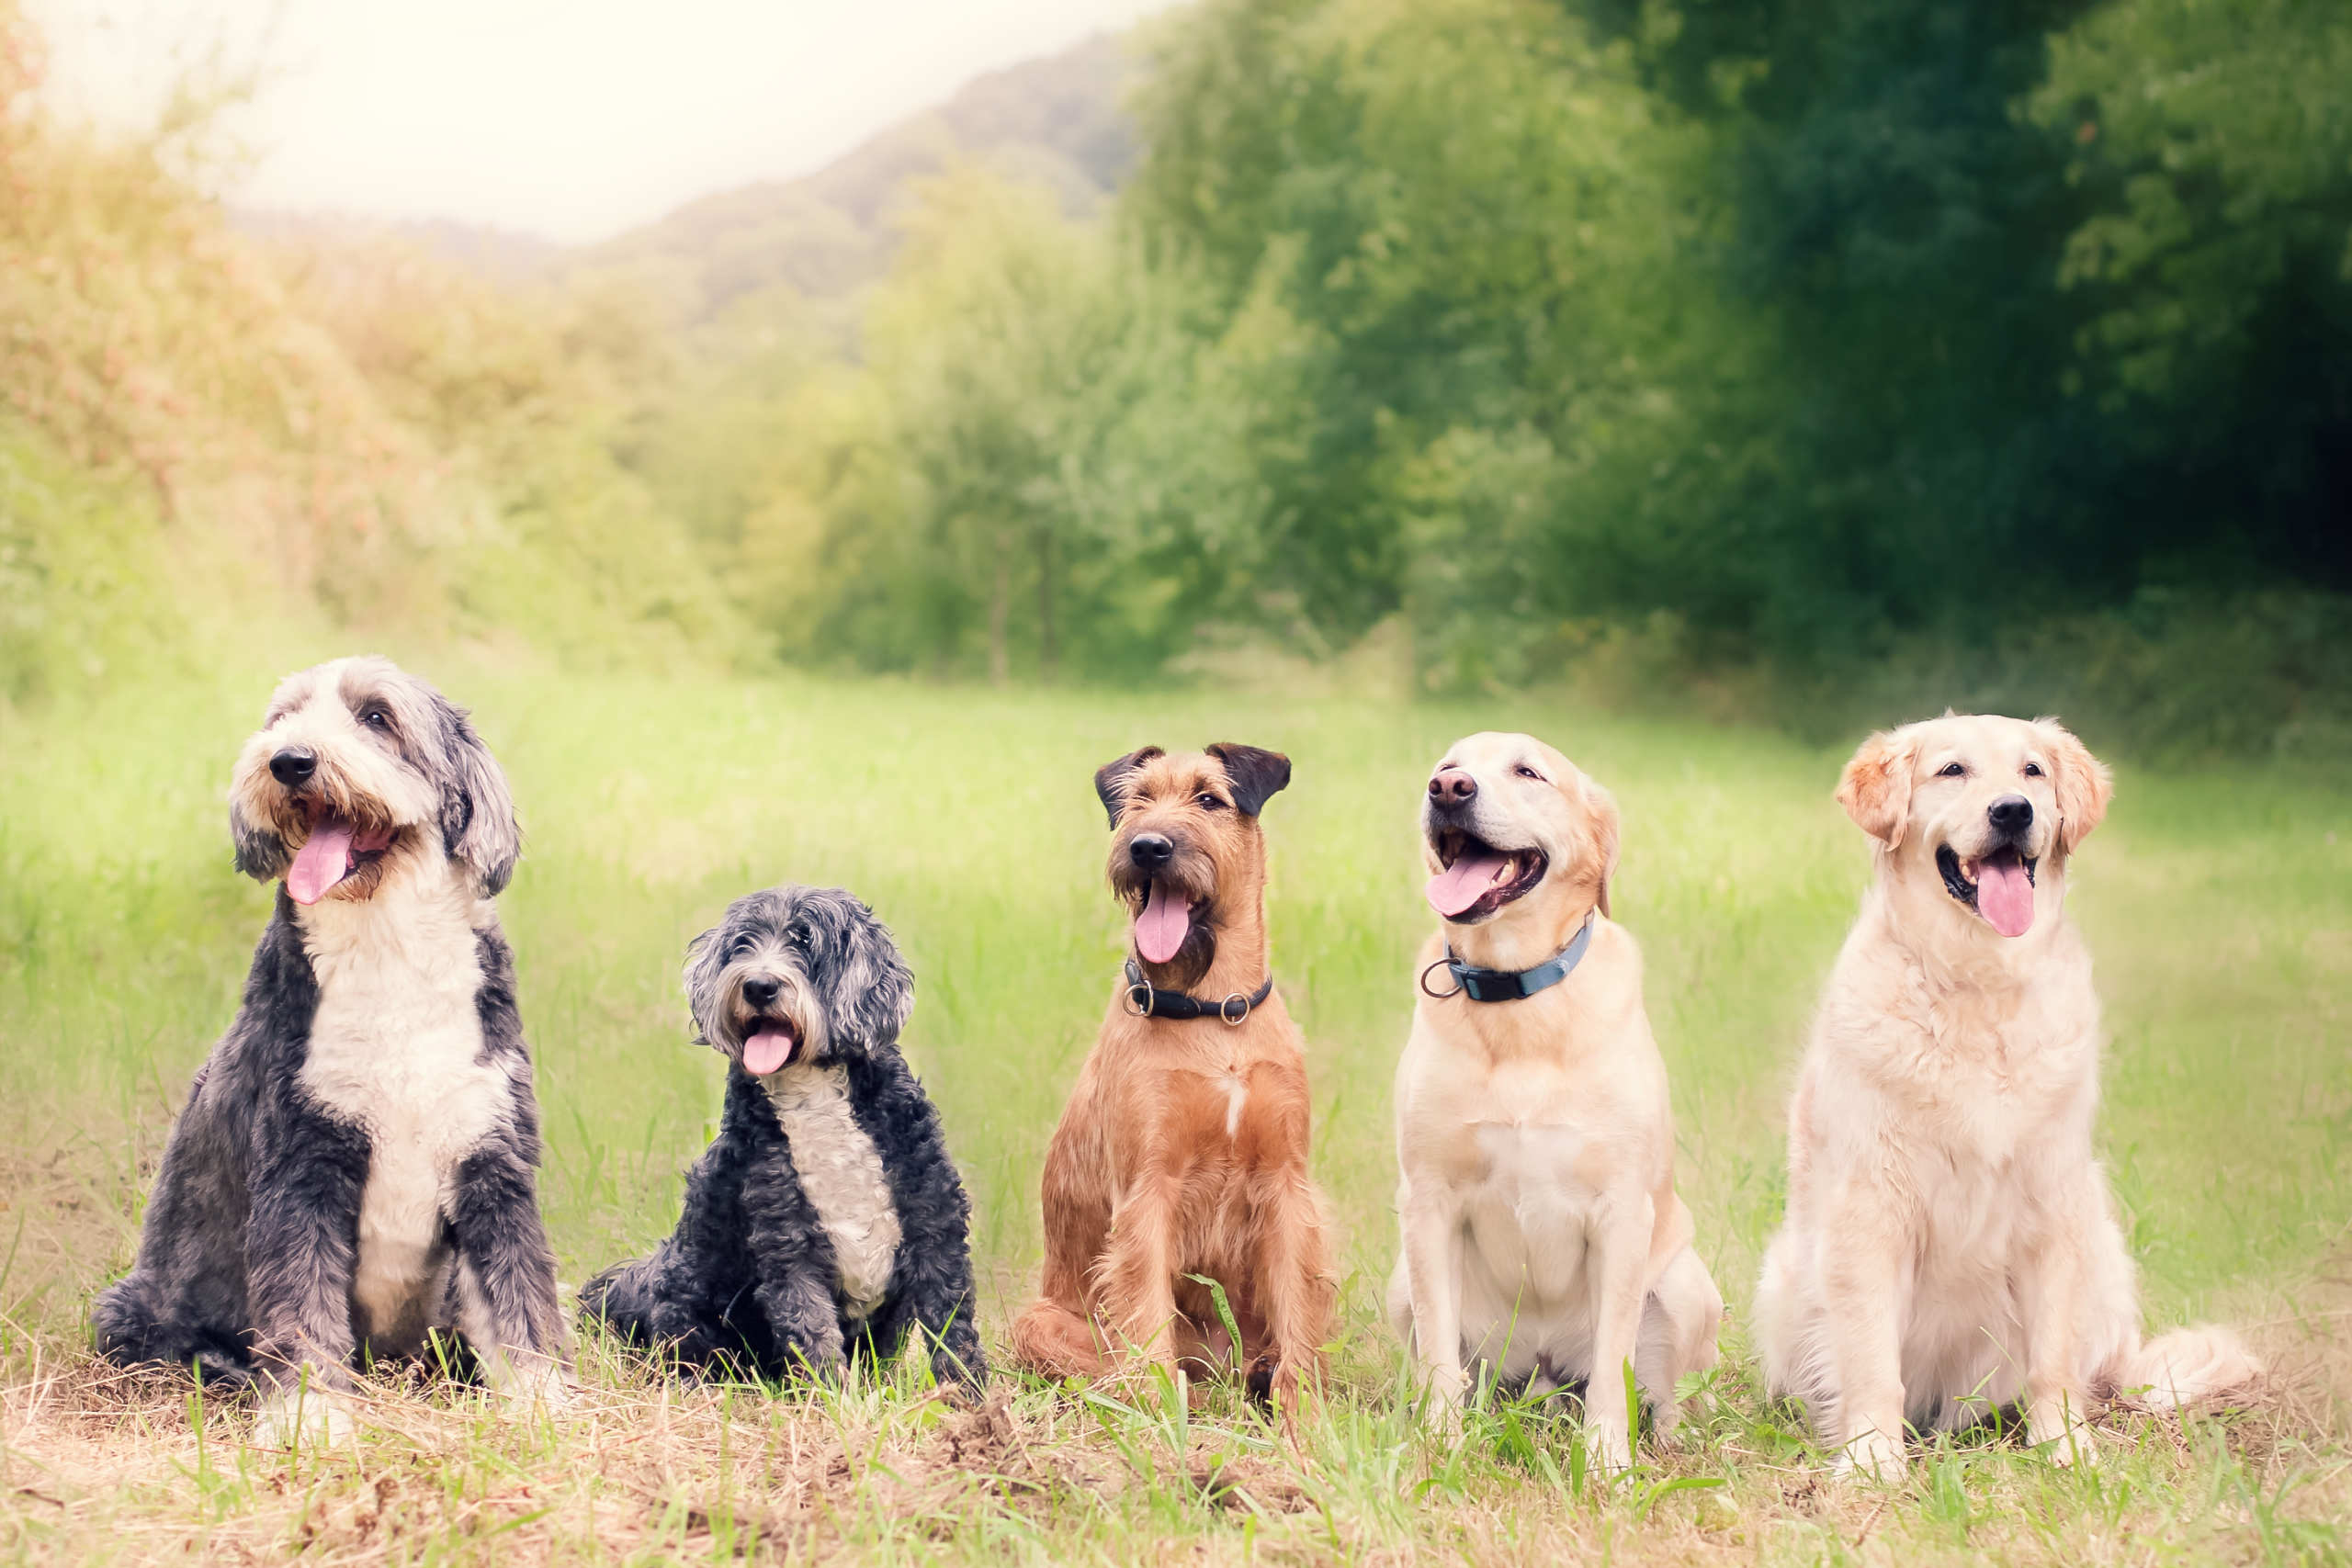 Image of dogs to introduce our blog titled 'Marketing for the Pet Industry'